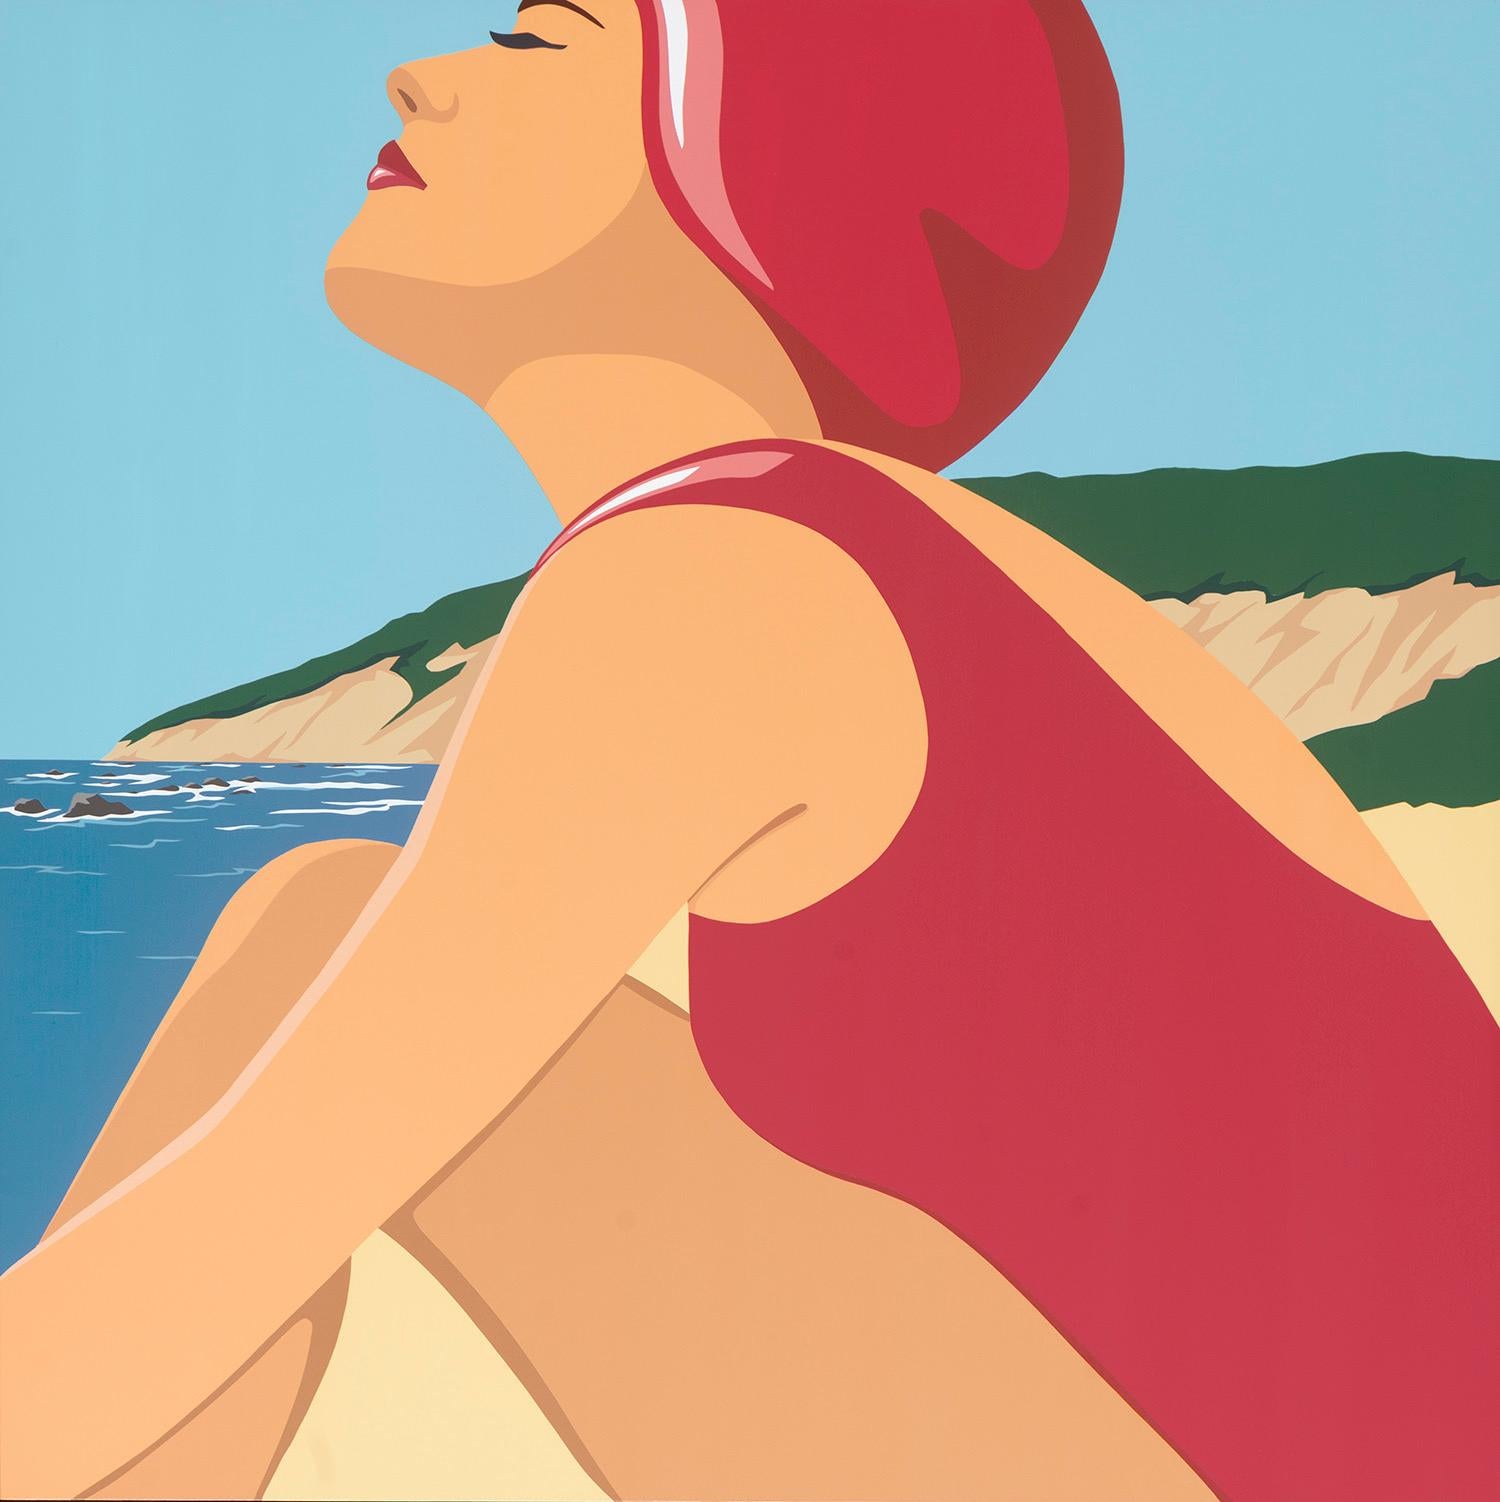 James Wolanin Portrait Painting - By the Shore, a close up side profile of a swimmer by the beach